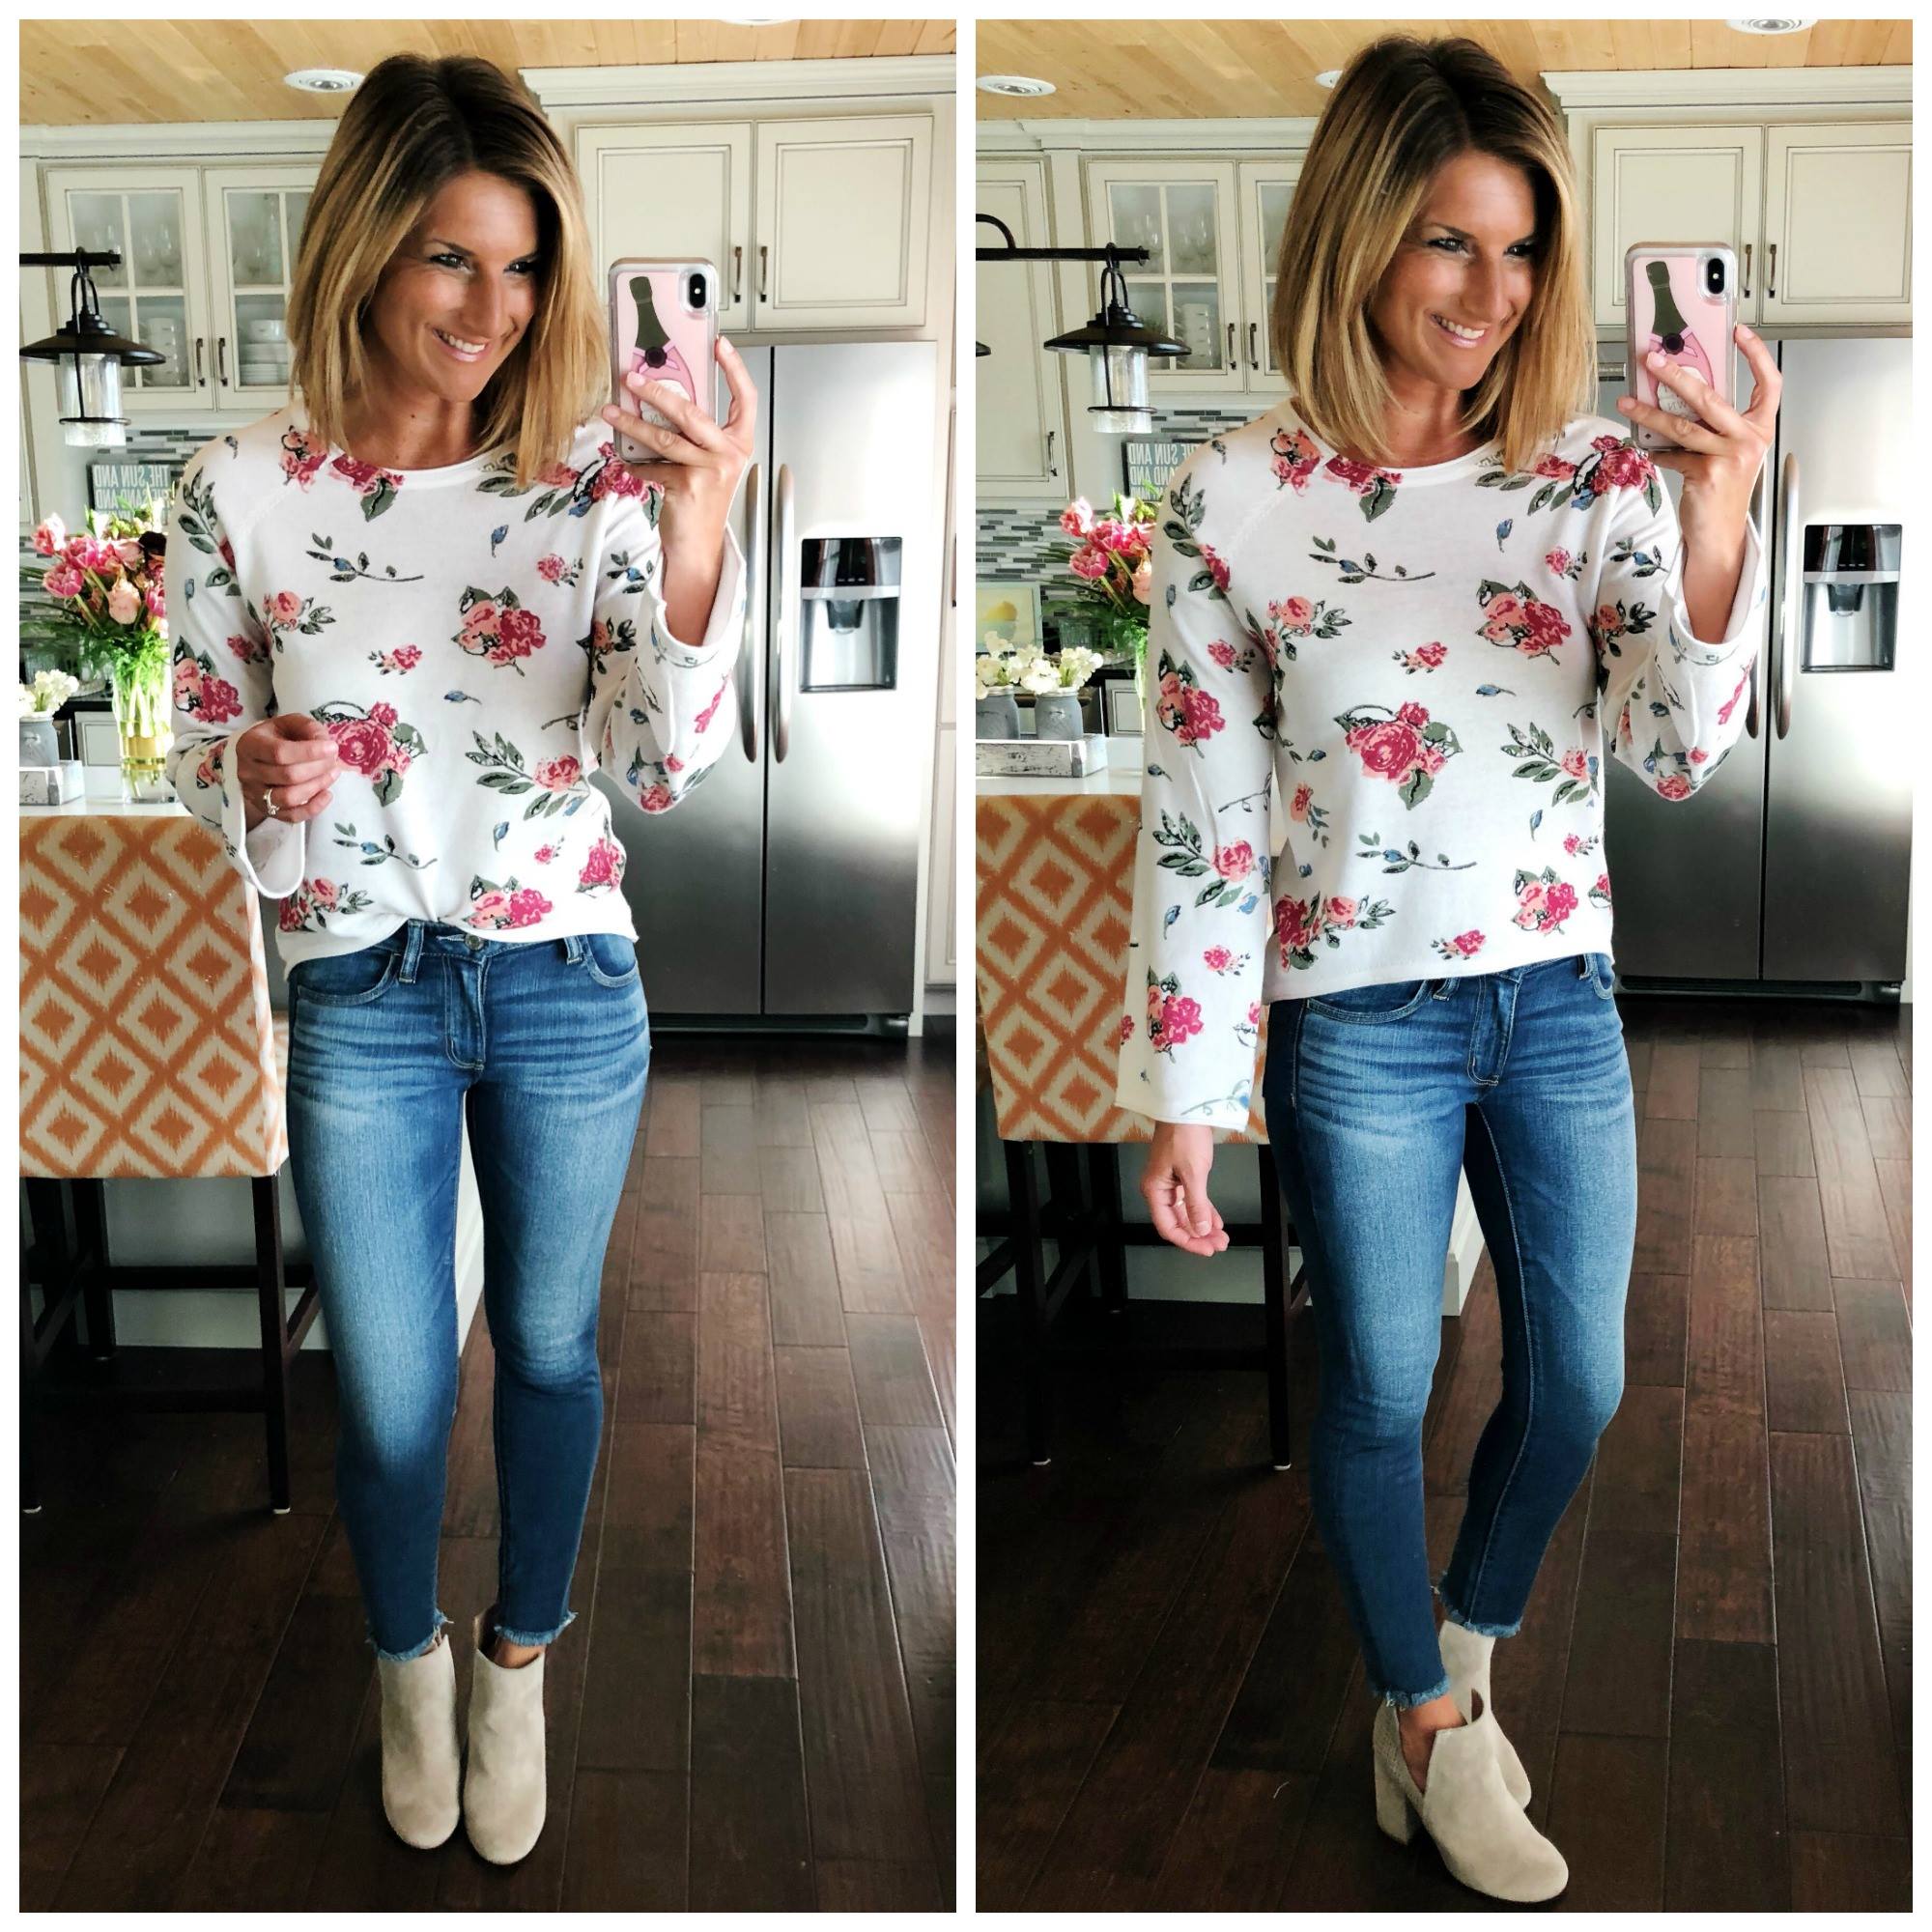 How to Style a Crop Top // Spring Fashion // Floral Top + Cropped Jeggings + Cutout Booties